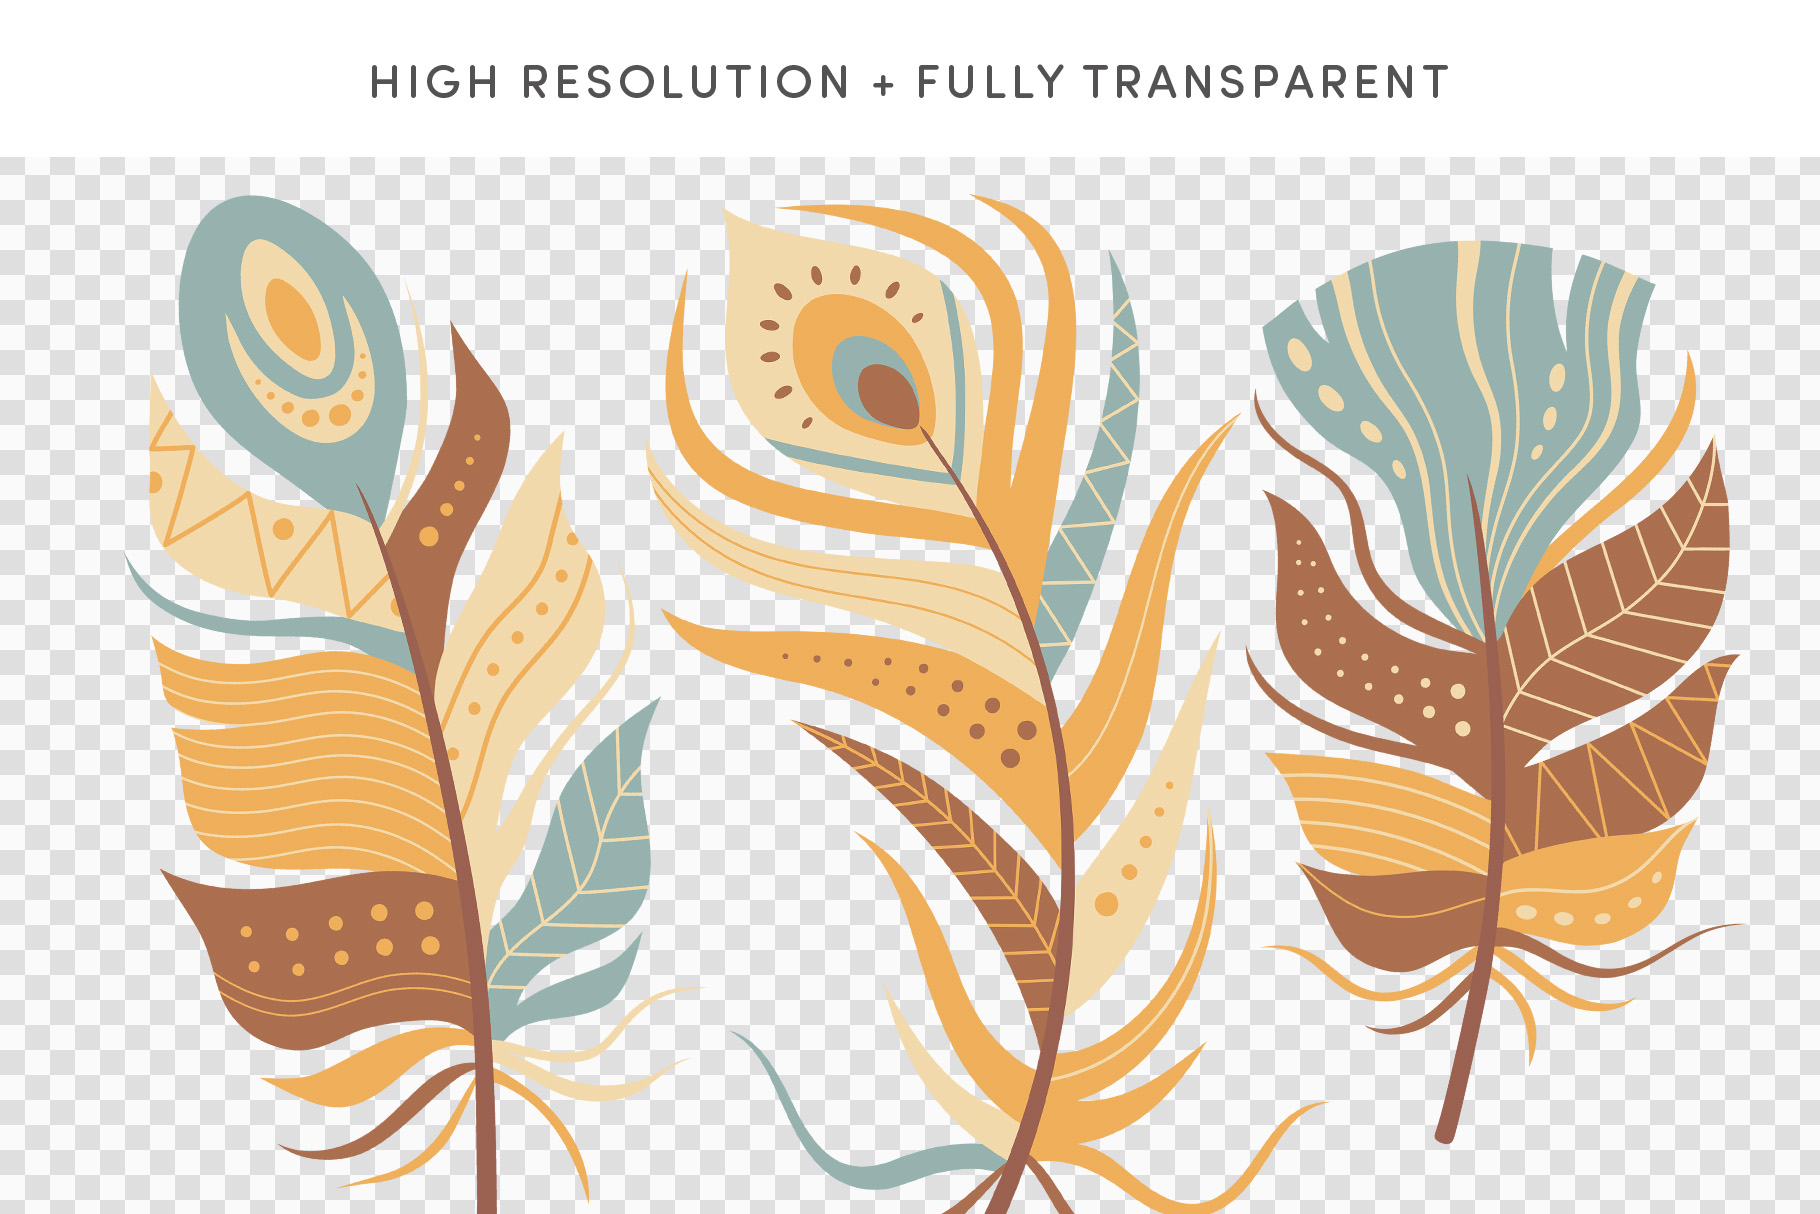 Feather Vector Graphics Pack (PSD, EPS, AI, PAT, PNG Format)